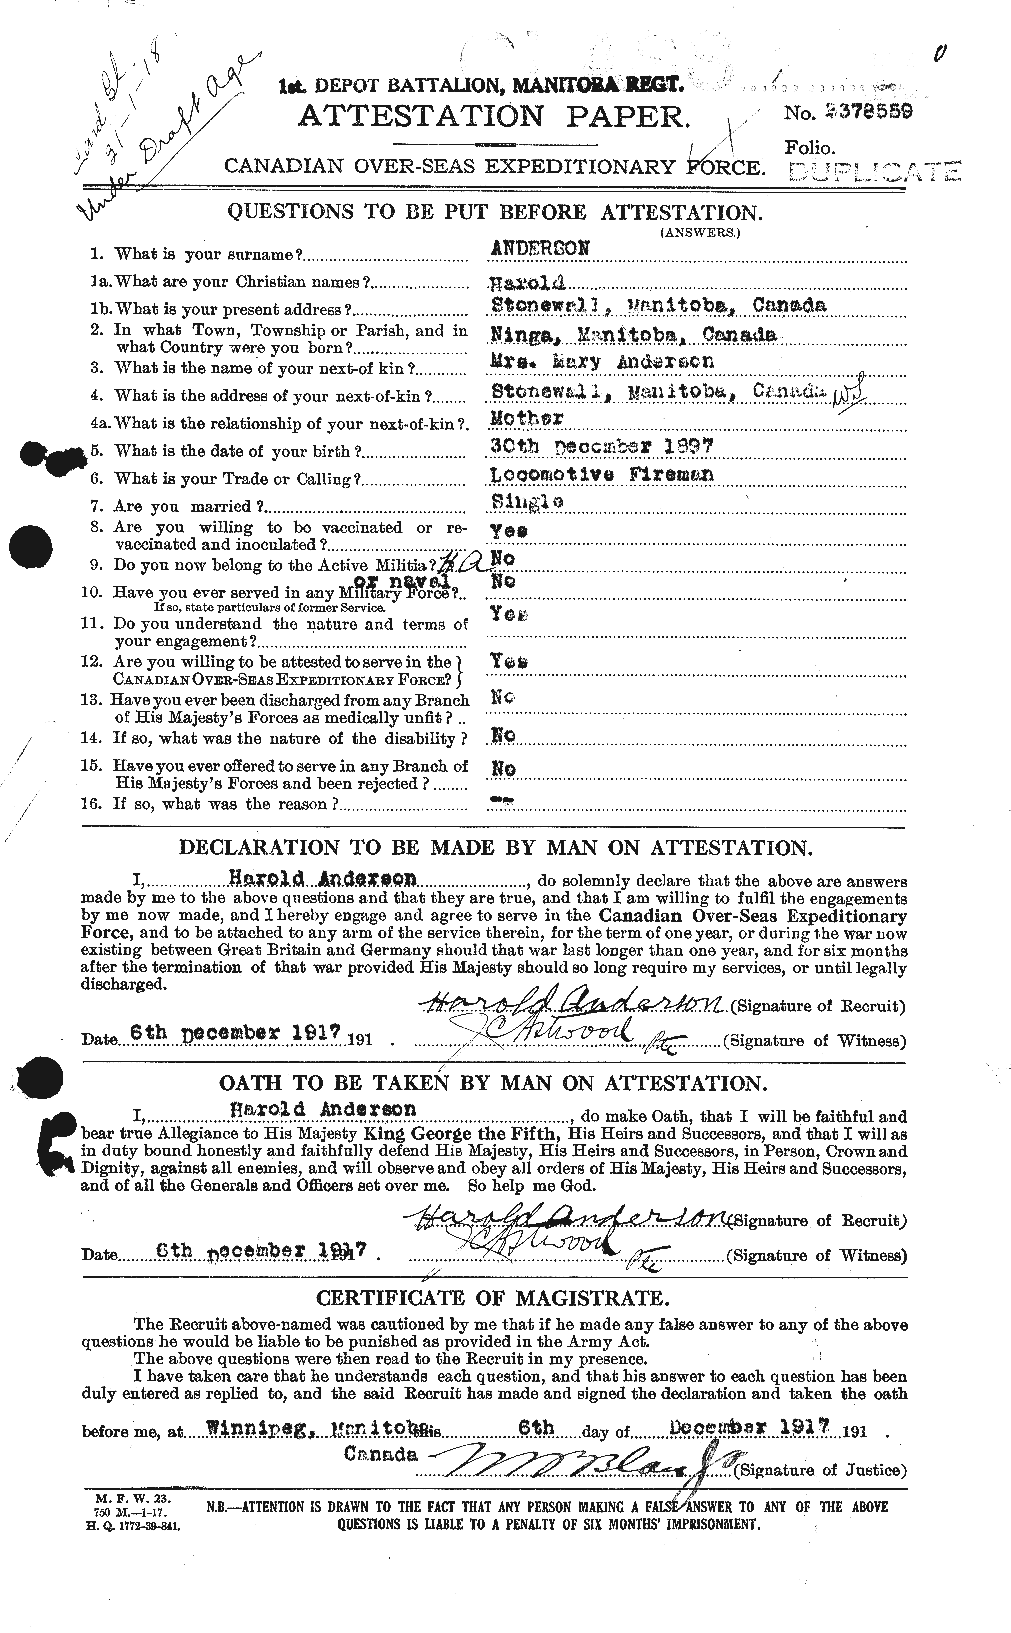 Personnel Records of the First World War - CEF 213297a